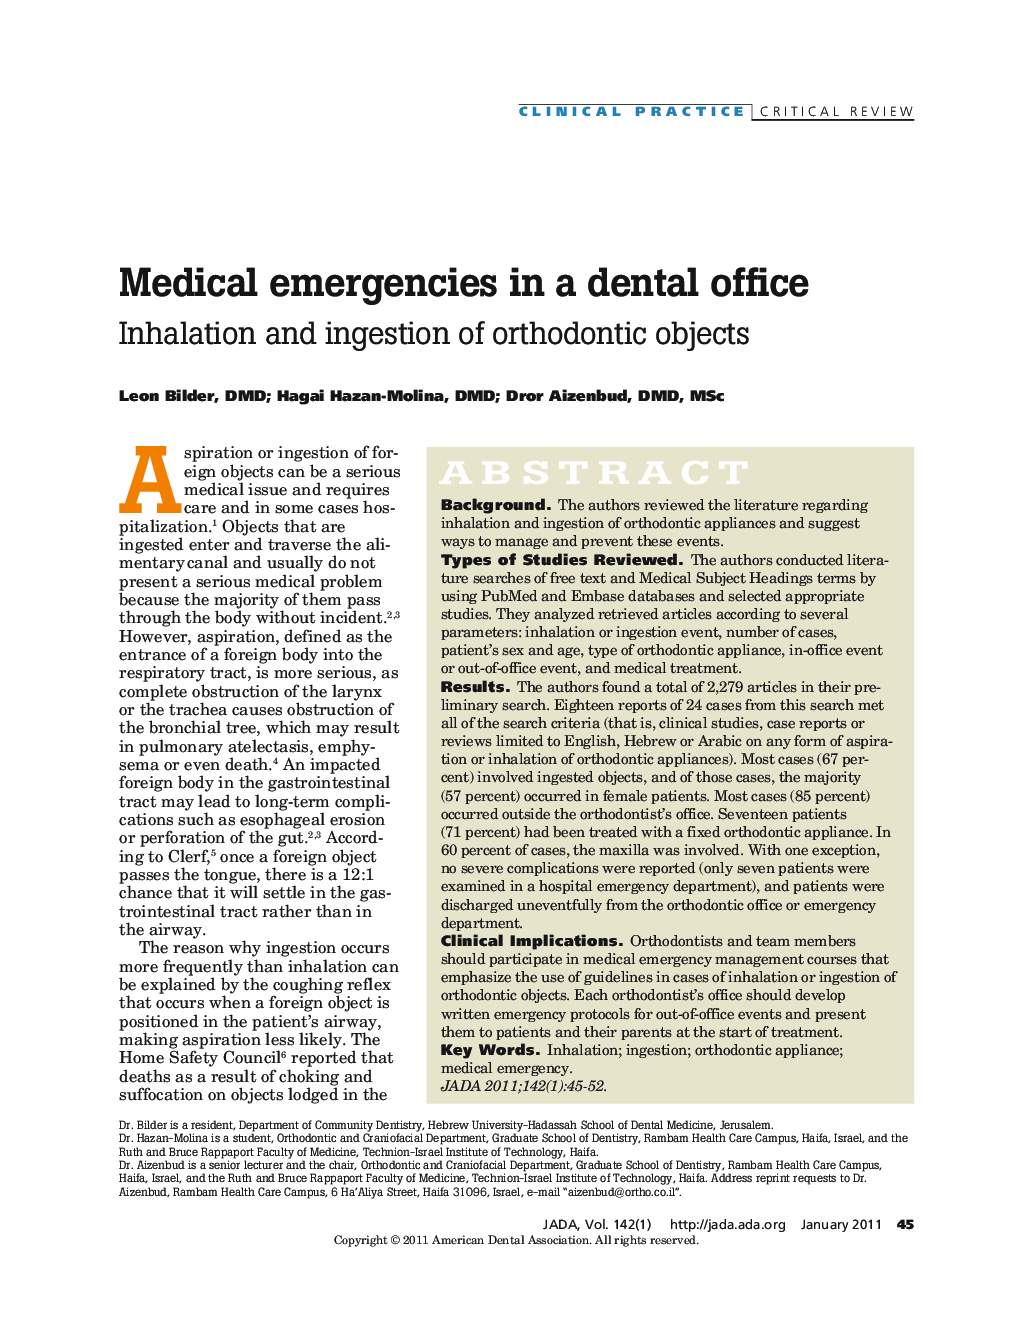 Medical Emergencies in a Dental Office : Inhalation and Ingestion of Orthodontic Objects